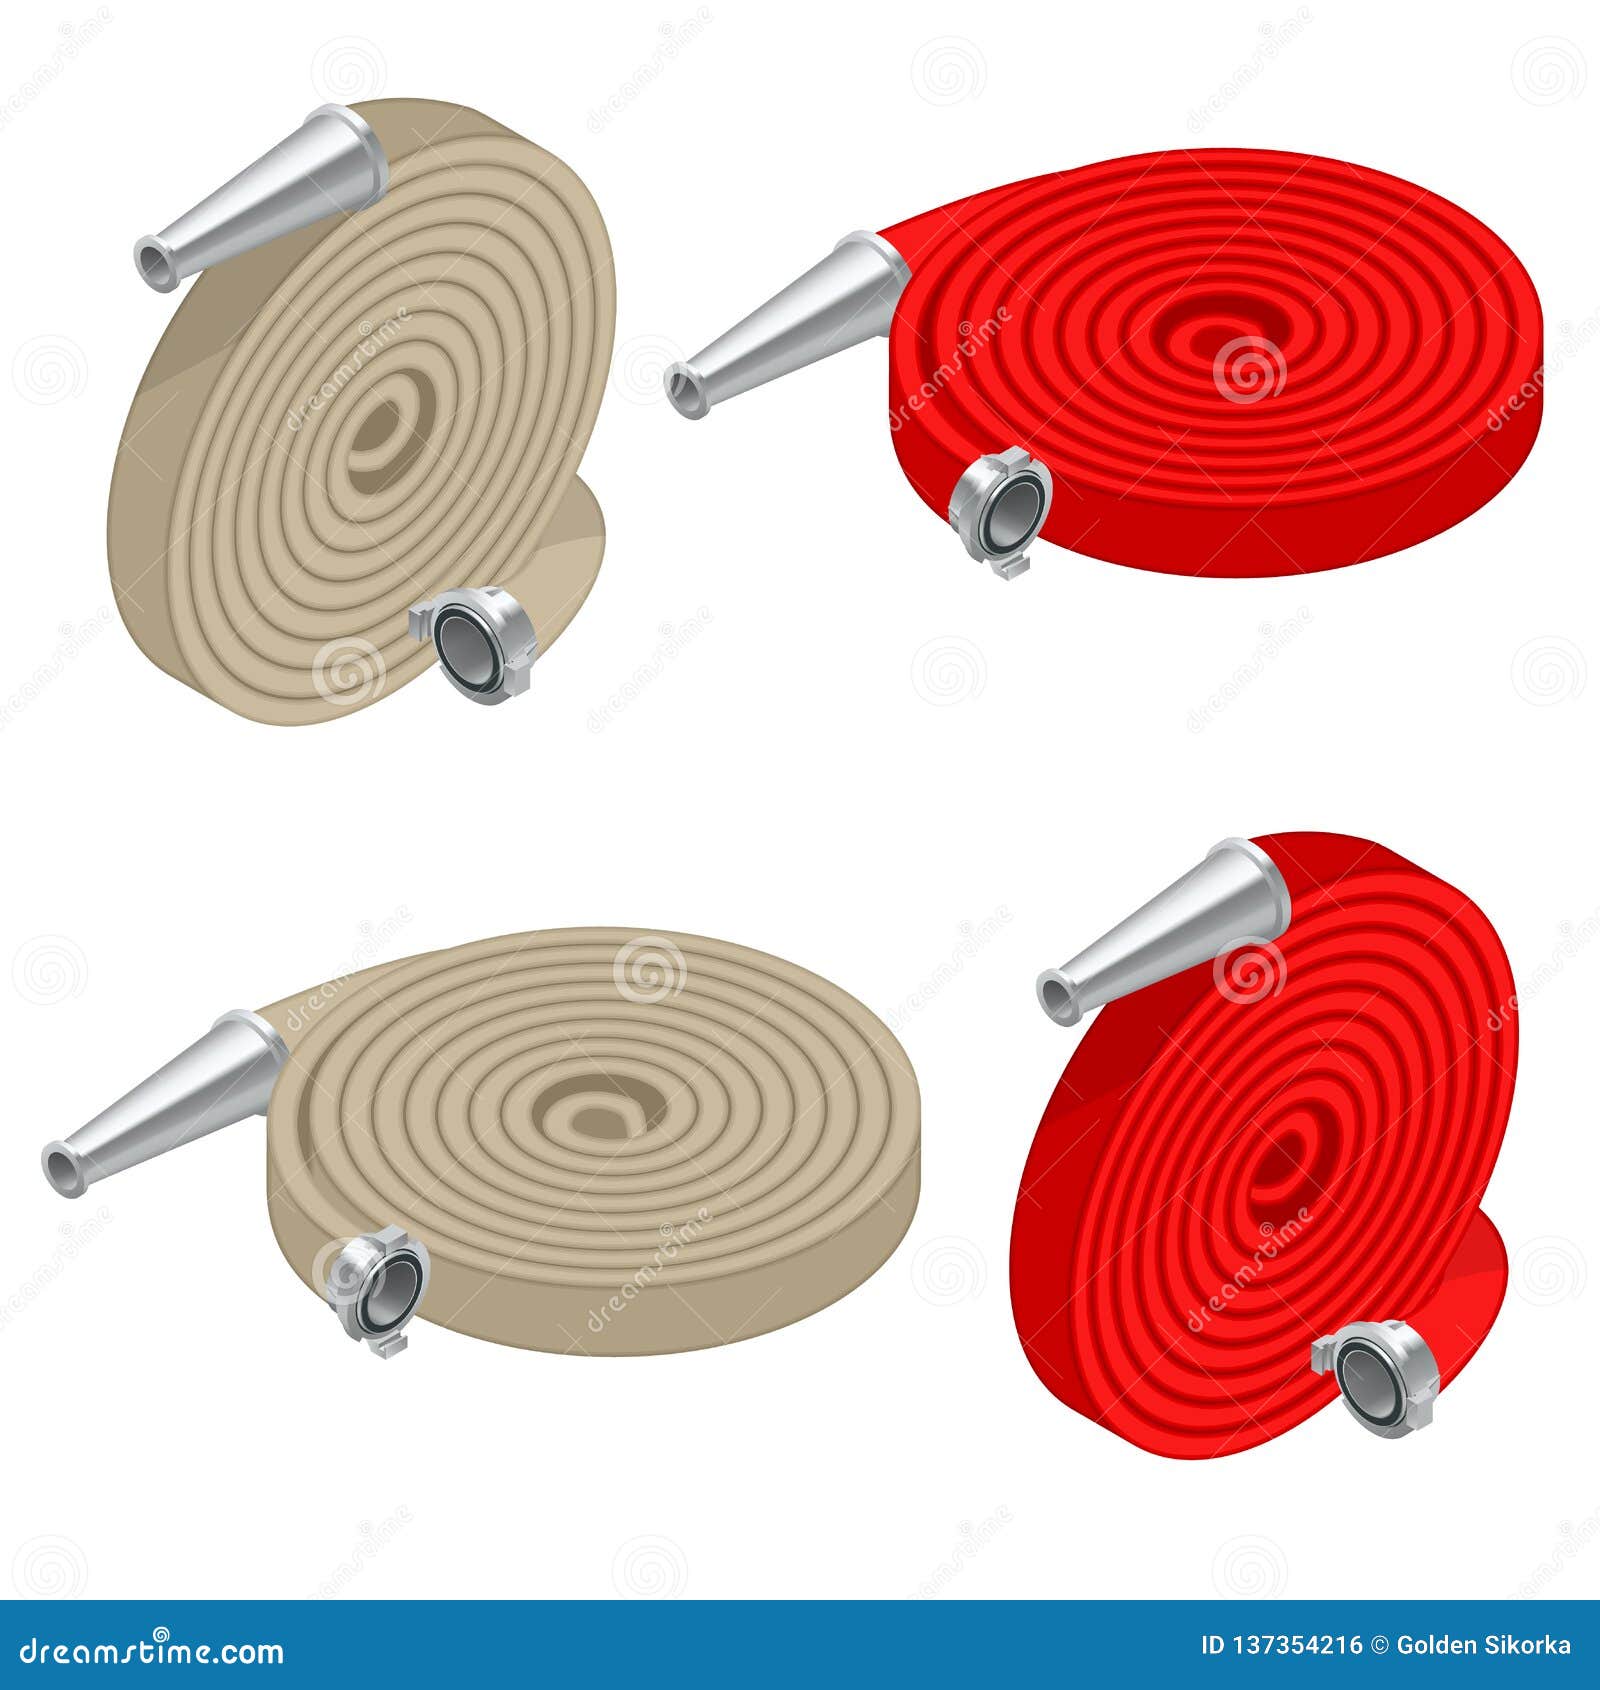 https://thumbs.dreamstime.com/z/isometric-set-fire-hoses-safety-protection-rolled-roll-red-hose-aluminum-connective-couplings-isolated-vector-137354216.jpg